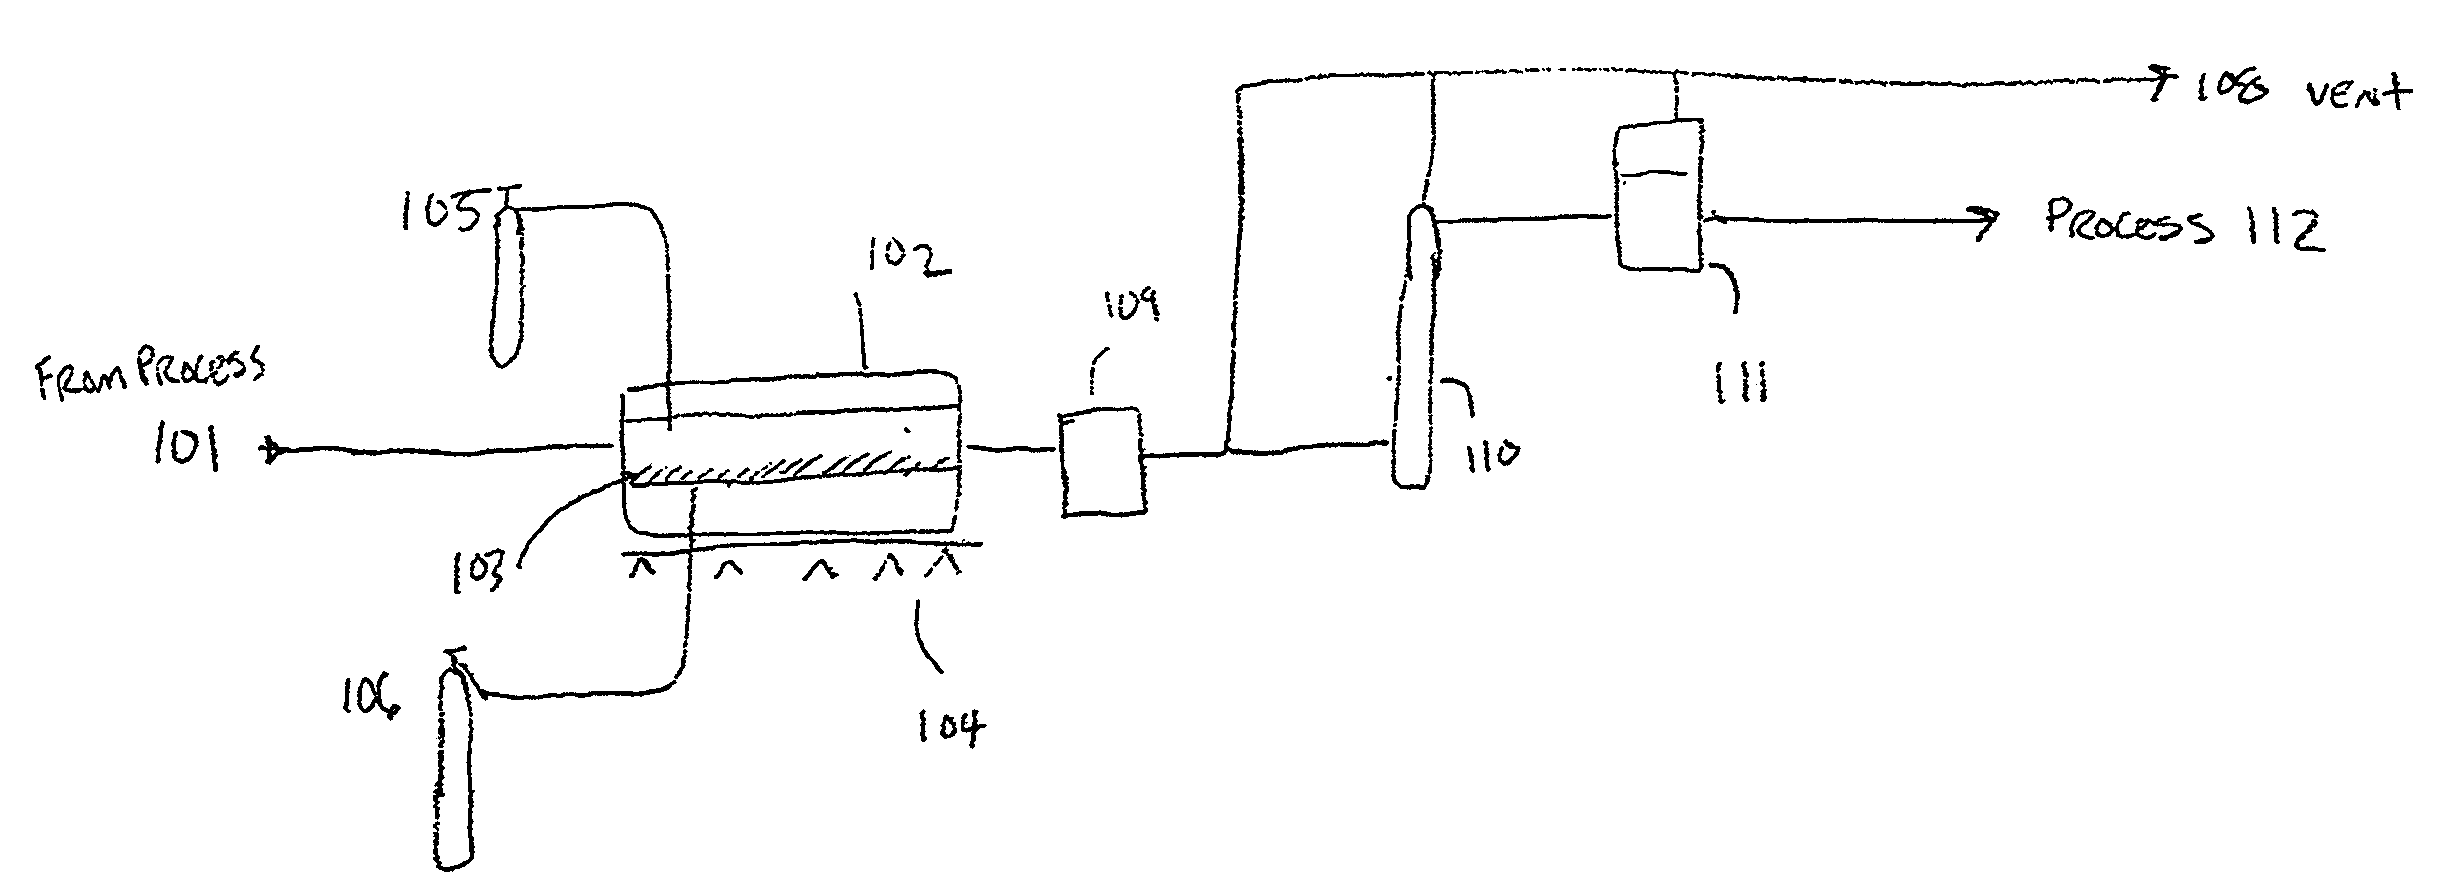 Method for the recycling and purification of an inorganic metallic precursor